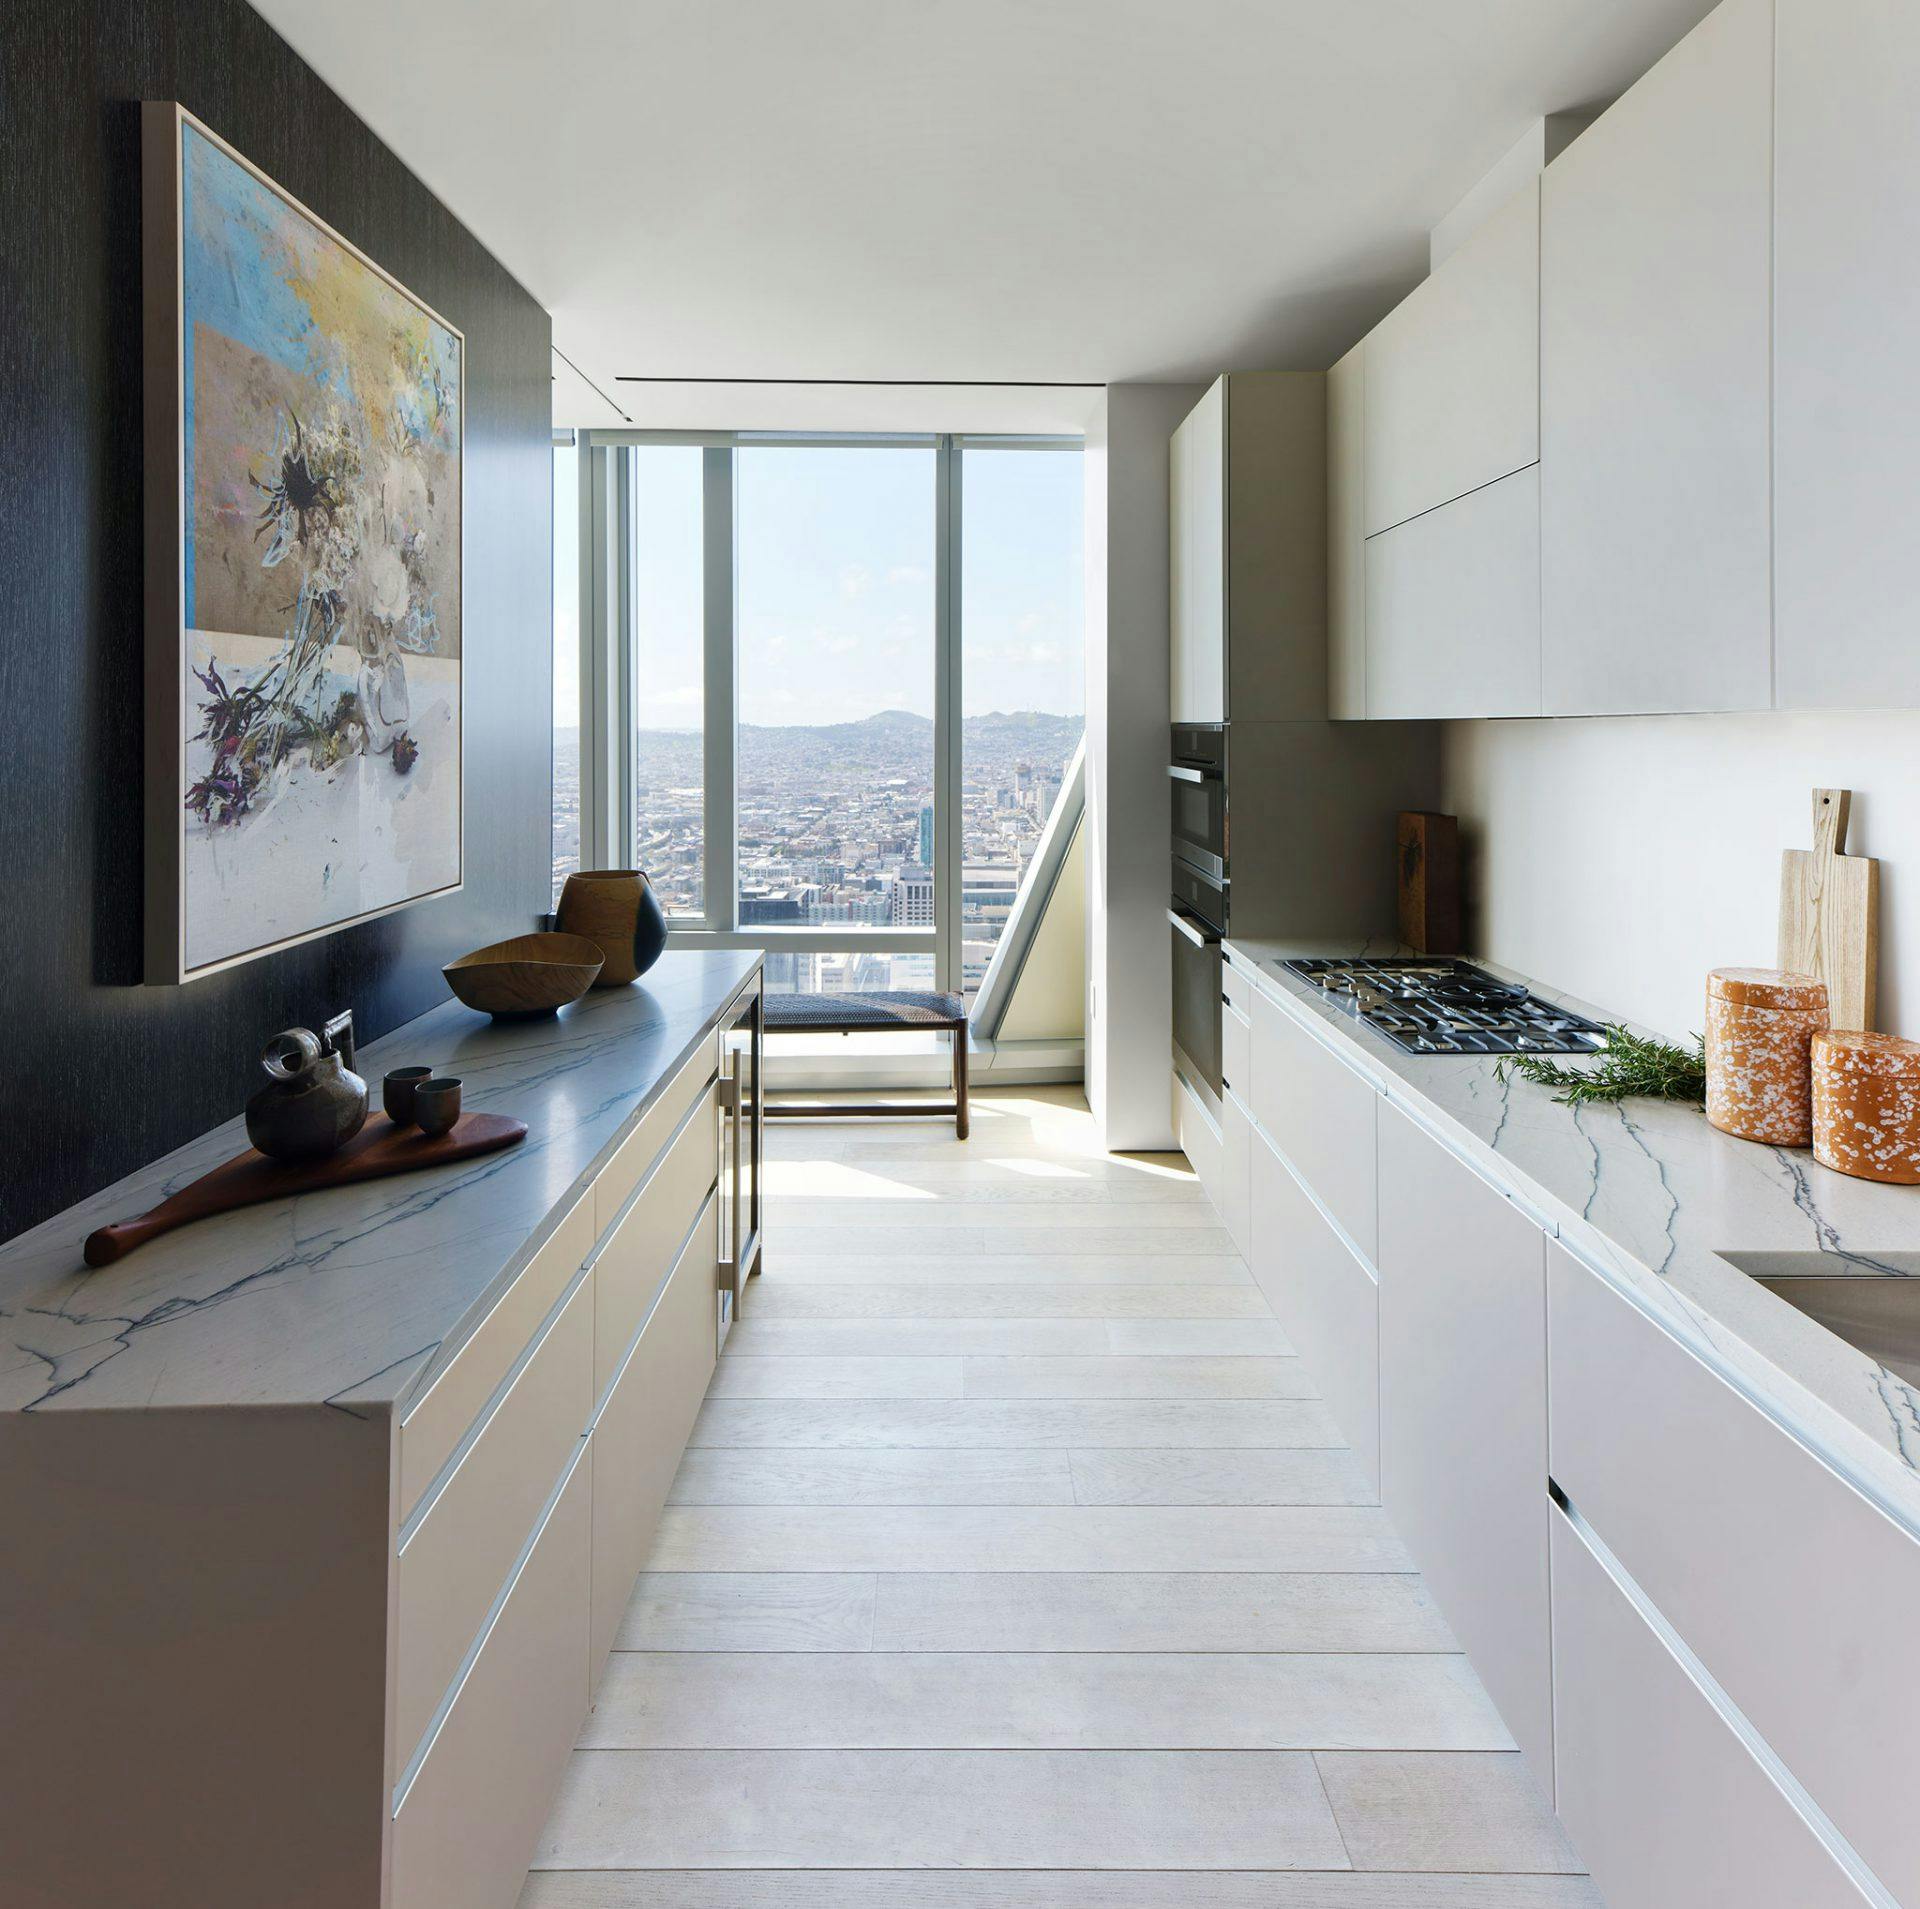 The kitchens at 181 Fremont are sleek in style, efficient in set up, and modernistic in design. Be it cooking dinner for one, two, or a friendly gathering, these kitchens have what it takes to meet your needs as a chef. Photo courtesy of the 181 Fremont website.